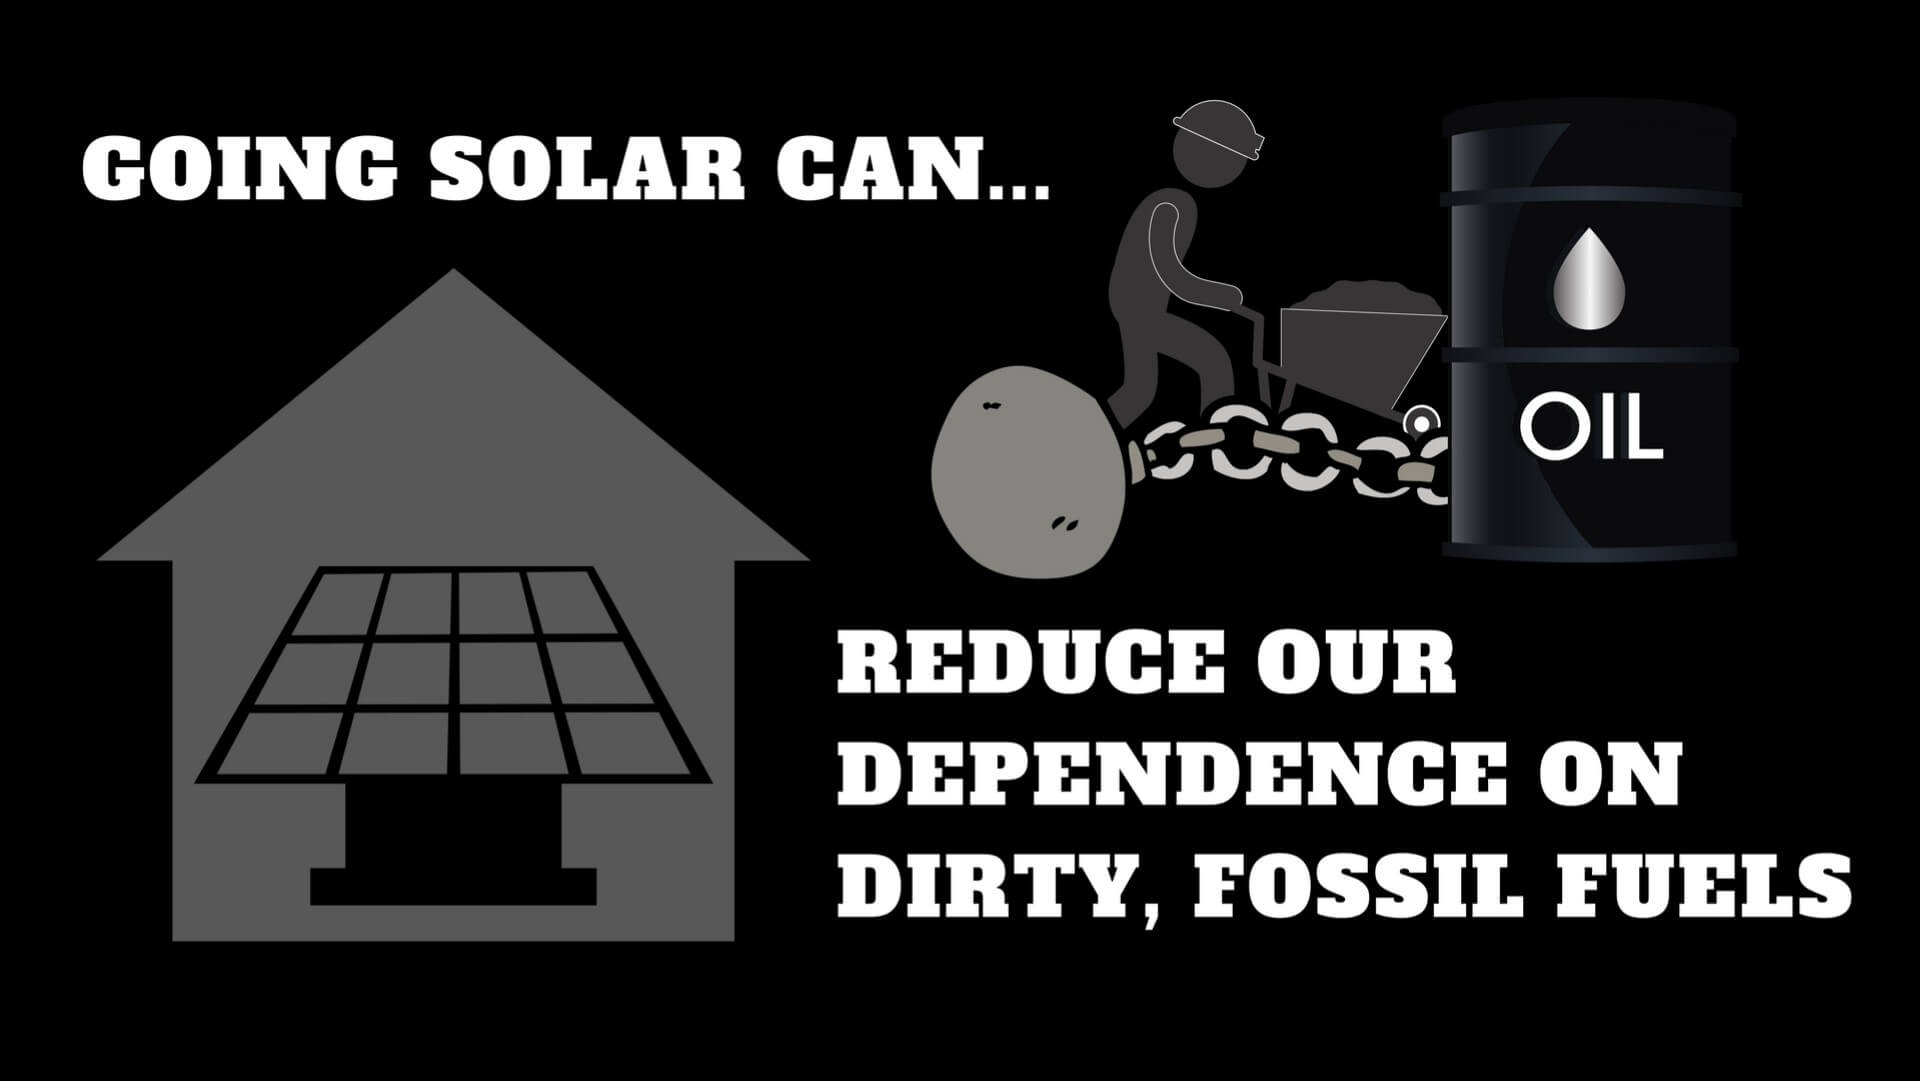 Installing solar electric system on your home or business will reduce your overall carbon footprint